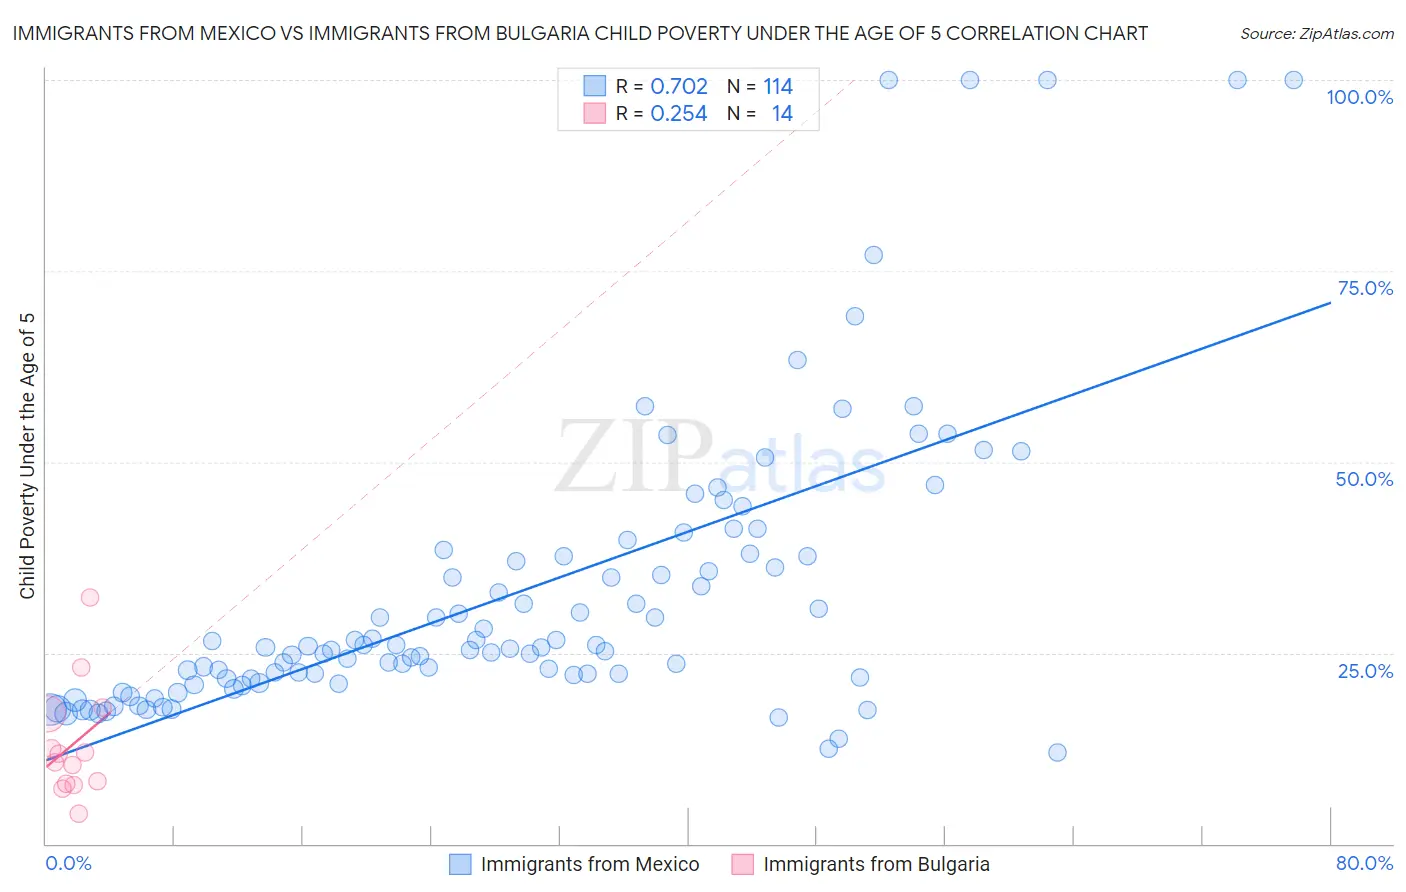 Immigrants from Mexico vs Immigrants from Bulgaria Child Poverty Under the Age of 5